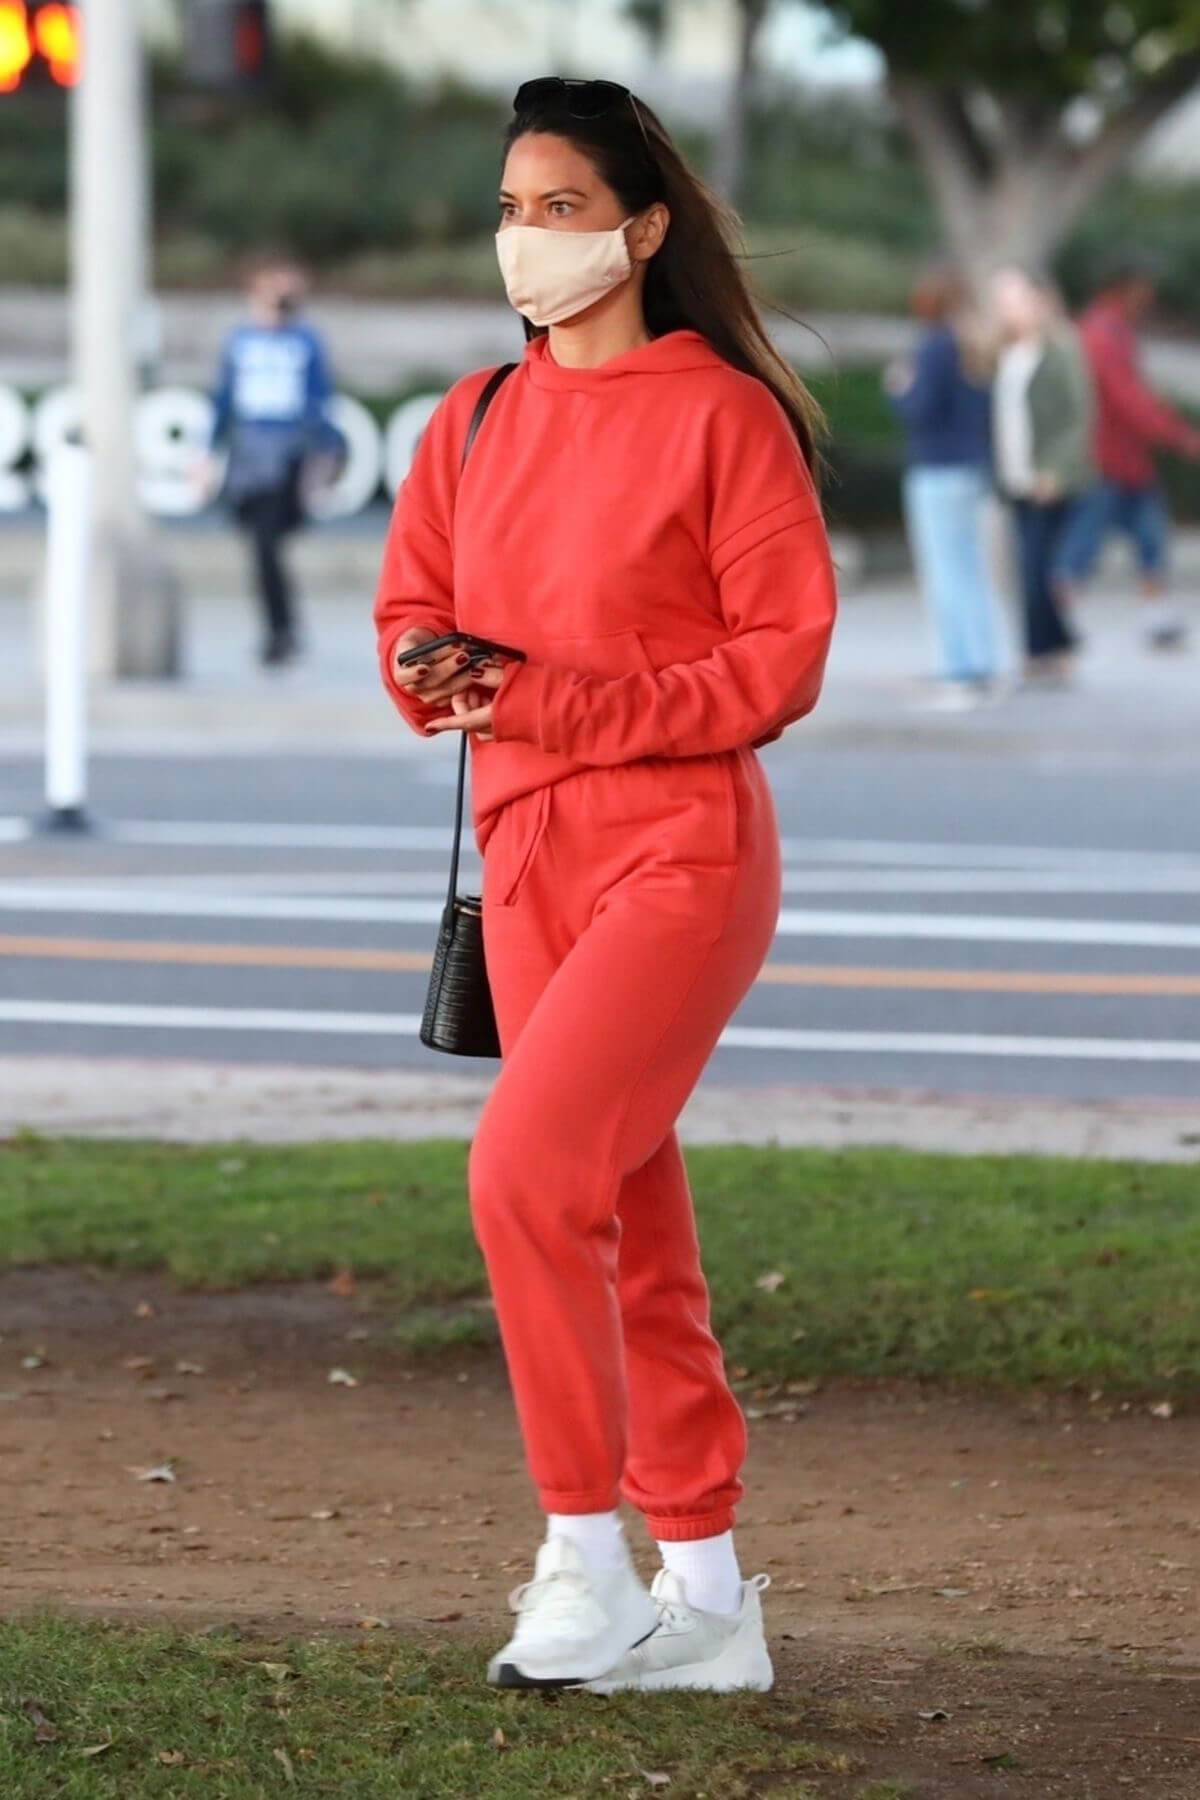 Olivia Munn seen in Red Sweatsuits Set Out and About in Santa Monica 11/24/2020